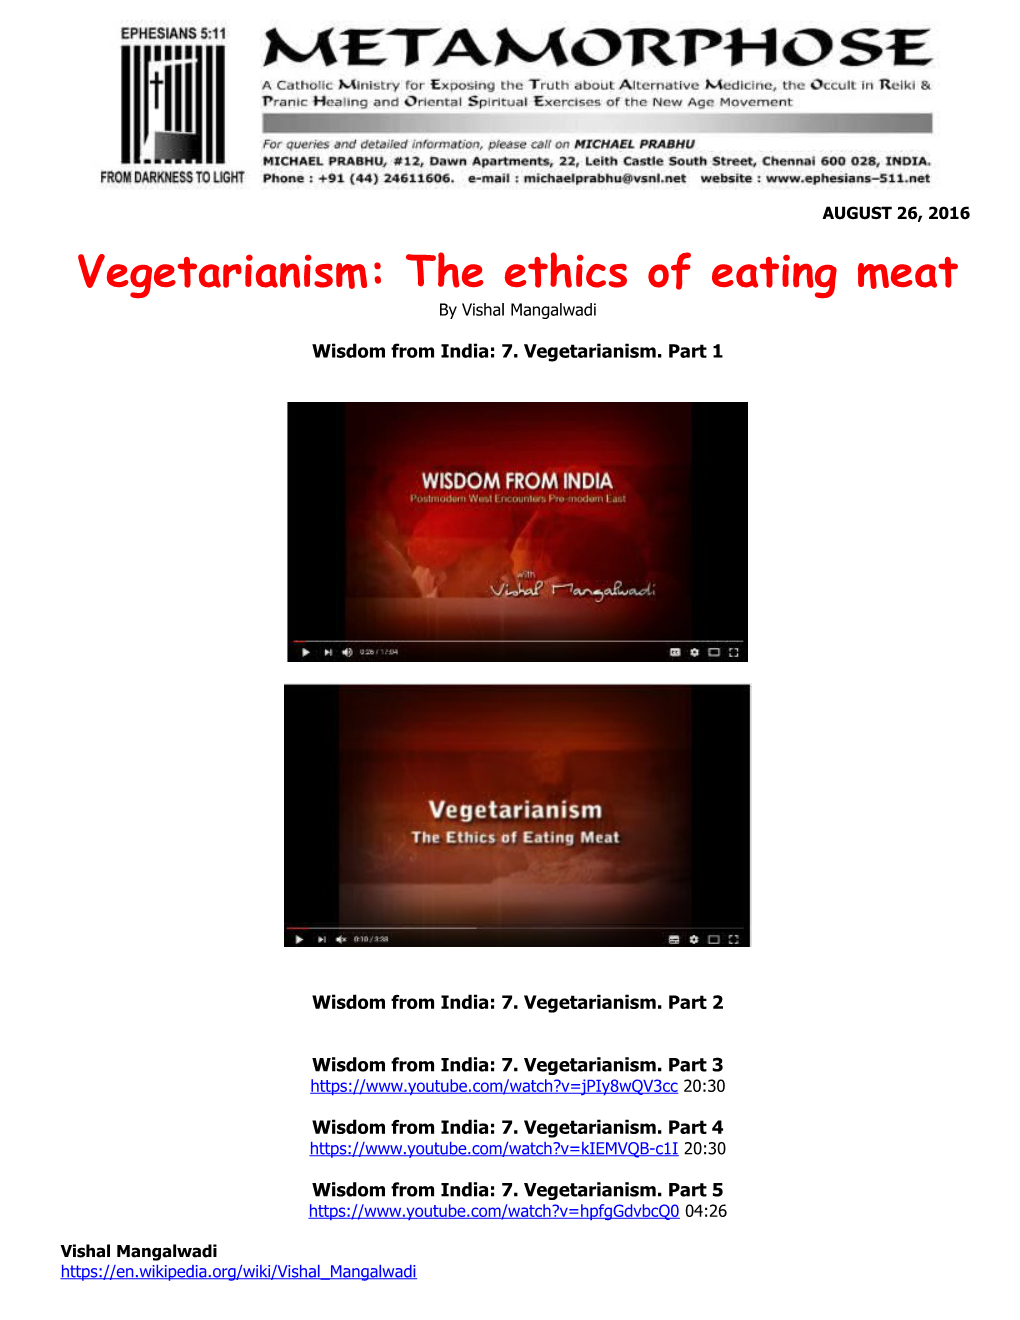 Vegetarianism: the Ethics of Eating Meat